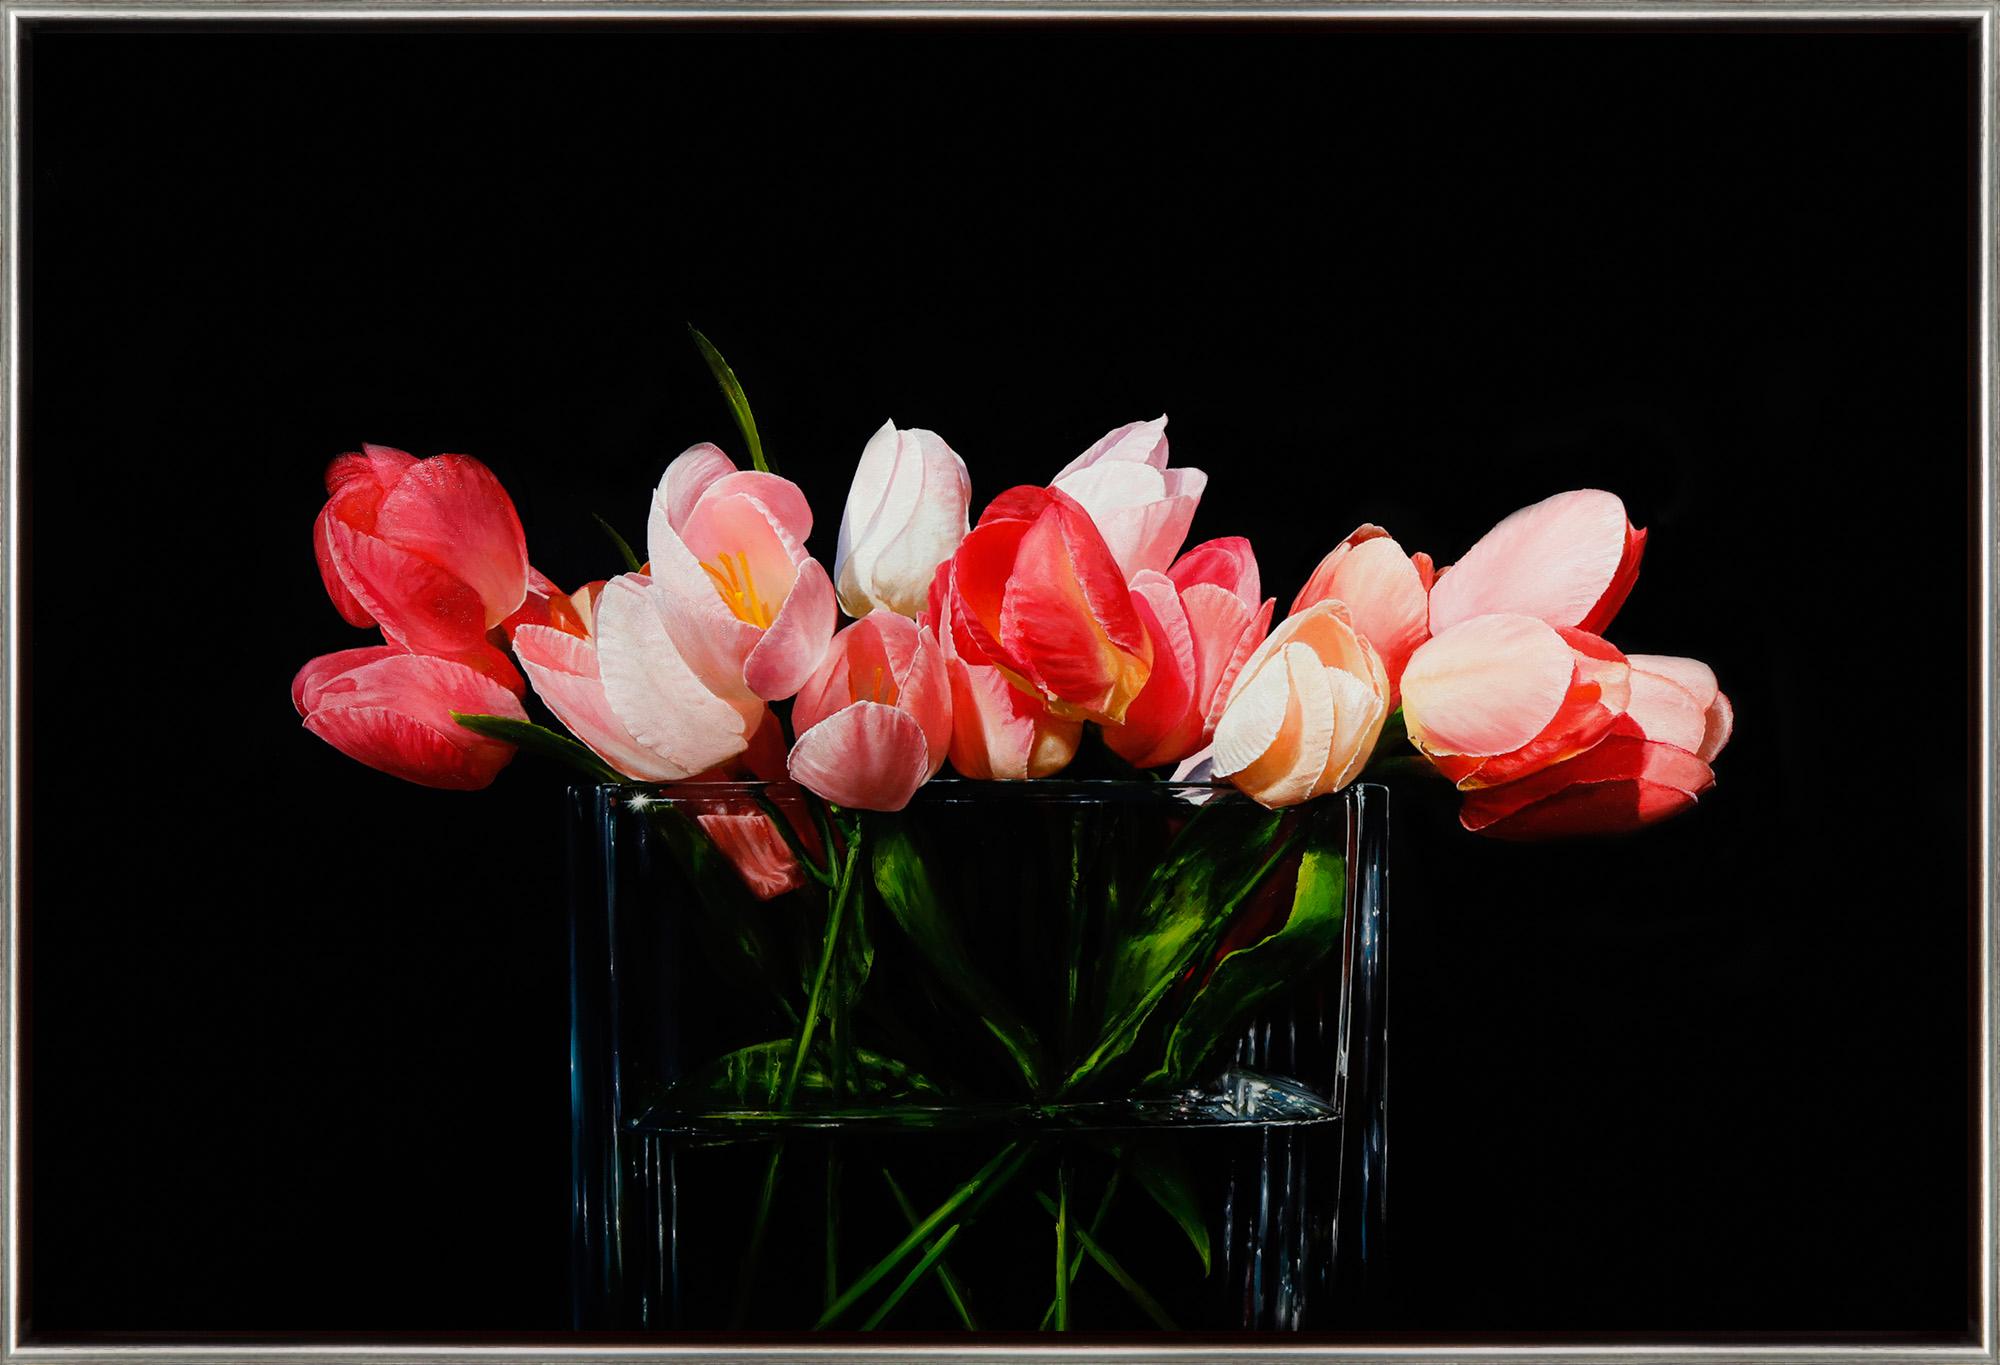 Alexander Sheversky Still-Life Painting - "Red Tulips" Hyper Realistic Painting of Red, Pink and White Tulips in Vase